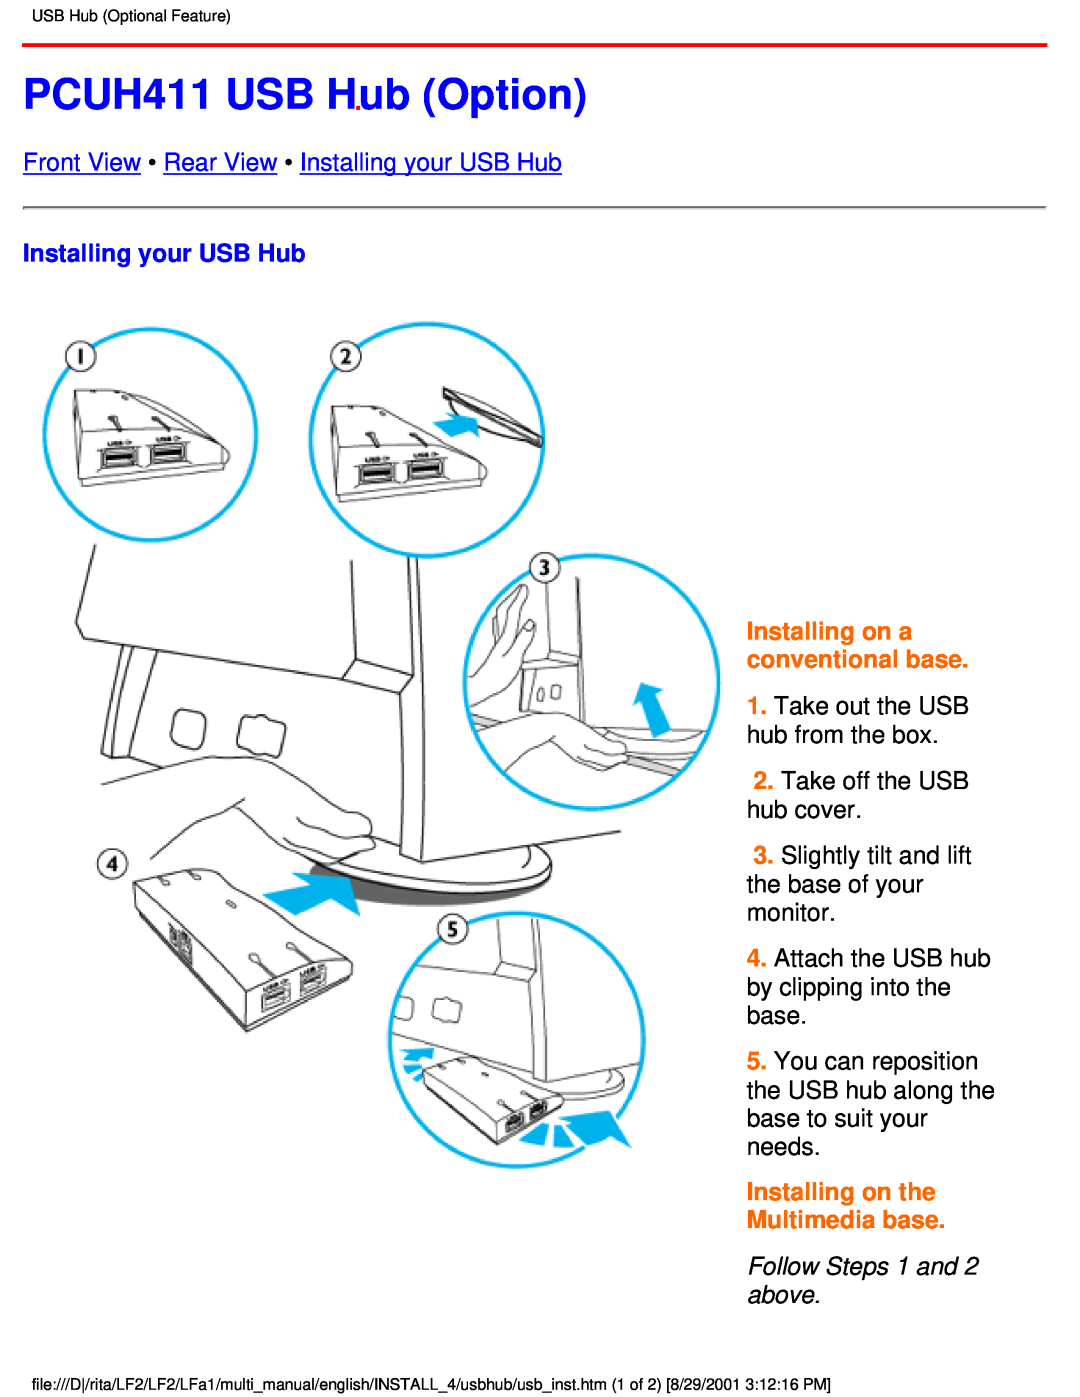 Philips 201B user manual PCUH411 USB Hub Option, Front View Rear View Installing your USB Hub, Follow Steps 1 and 2 above 